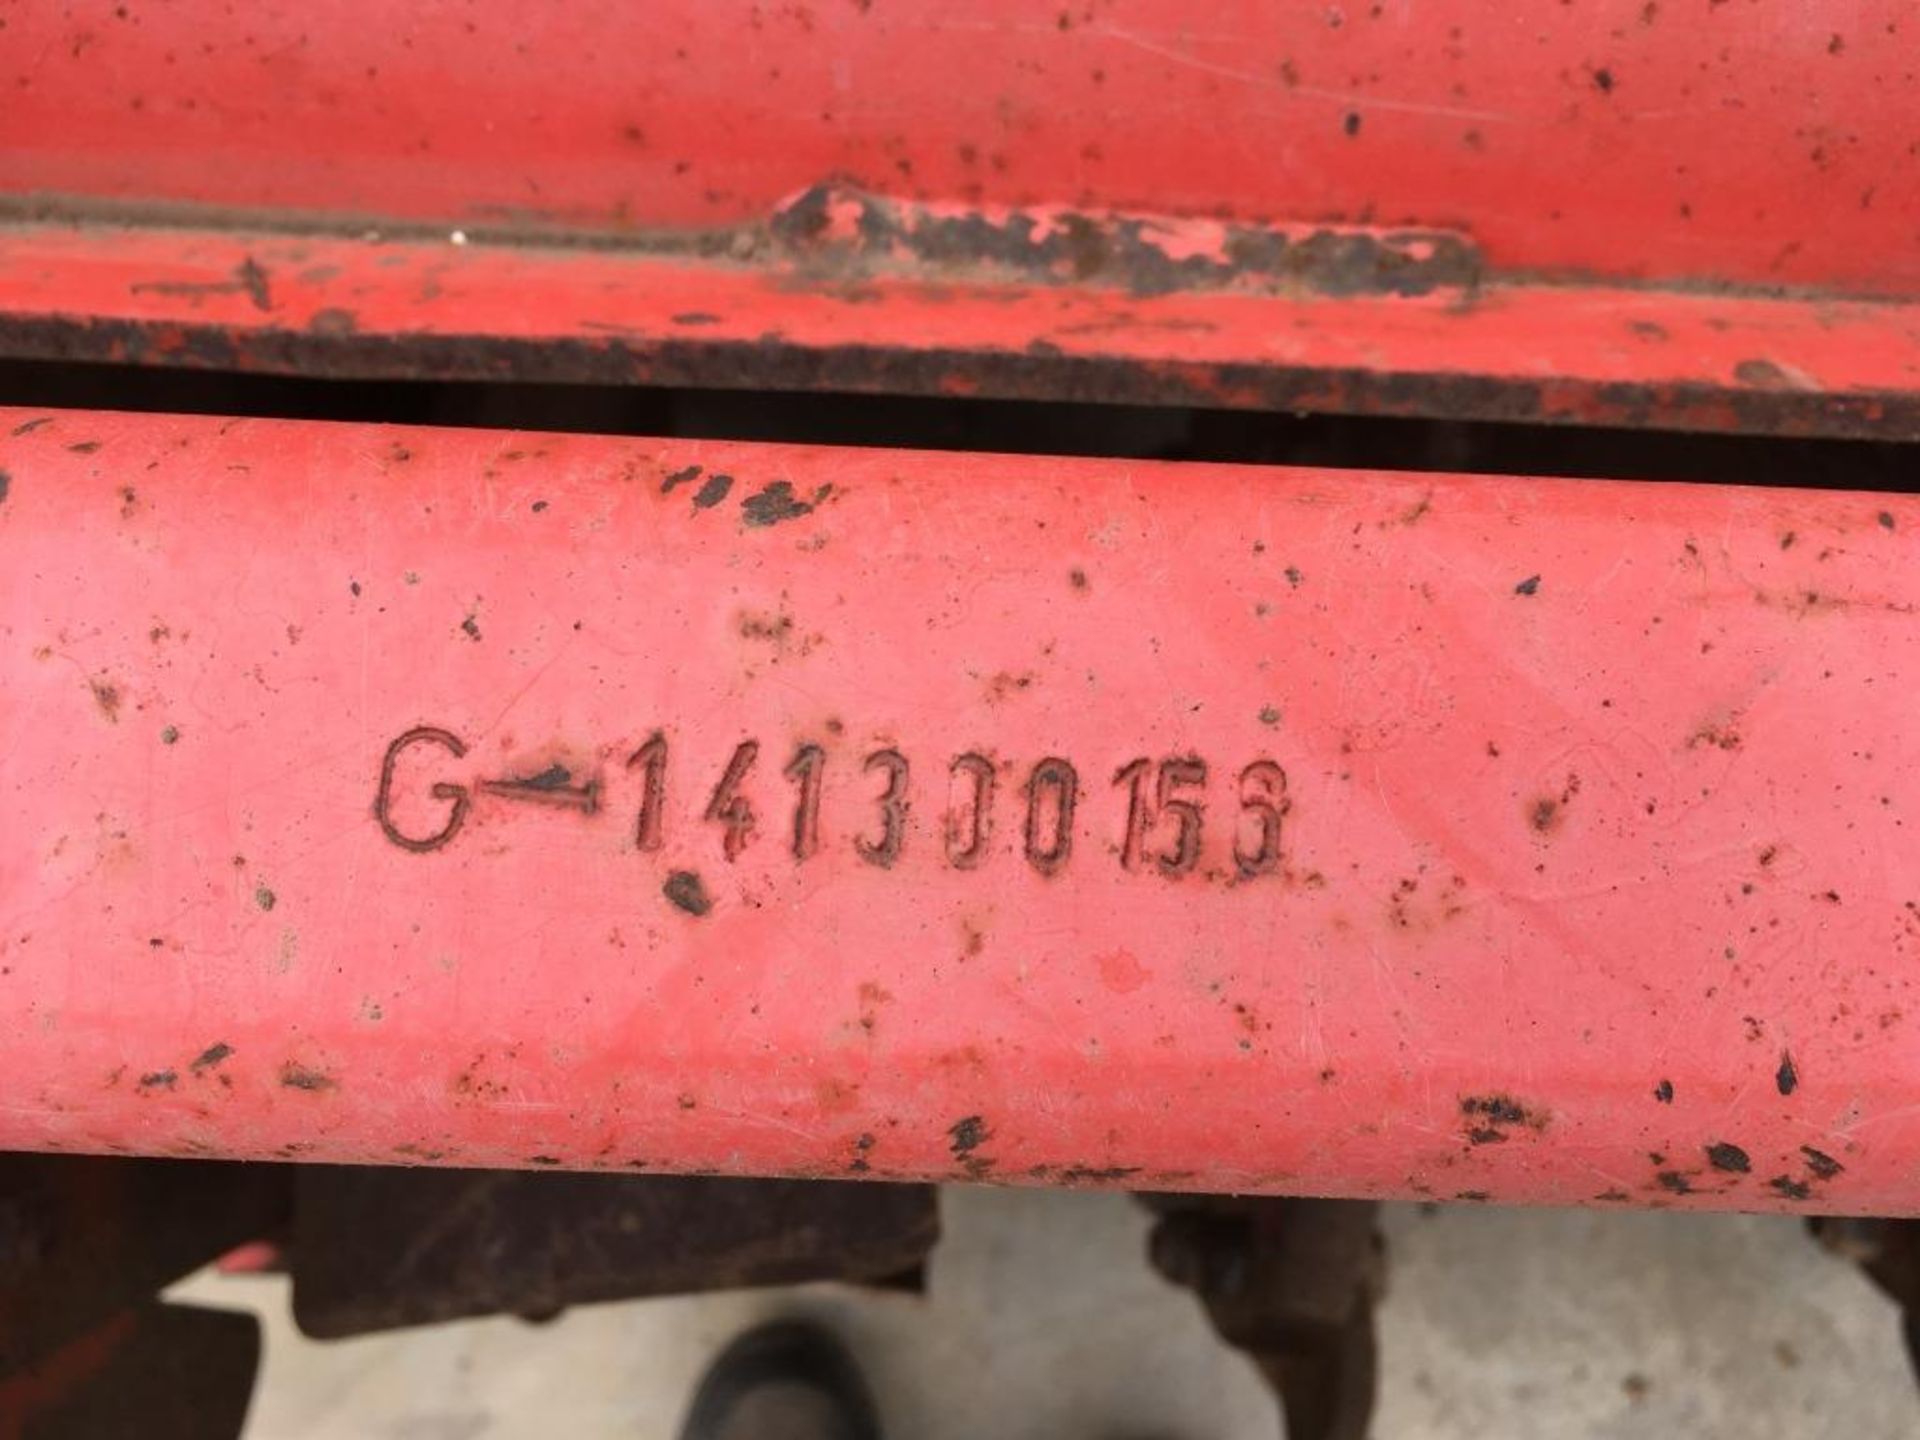 Grimme 6ft rotovator serial number: 141300156 - Image 7 of 7